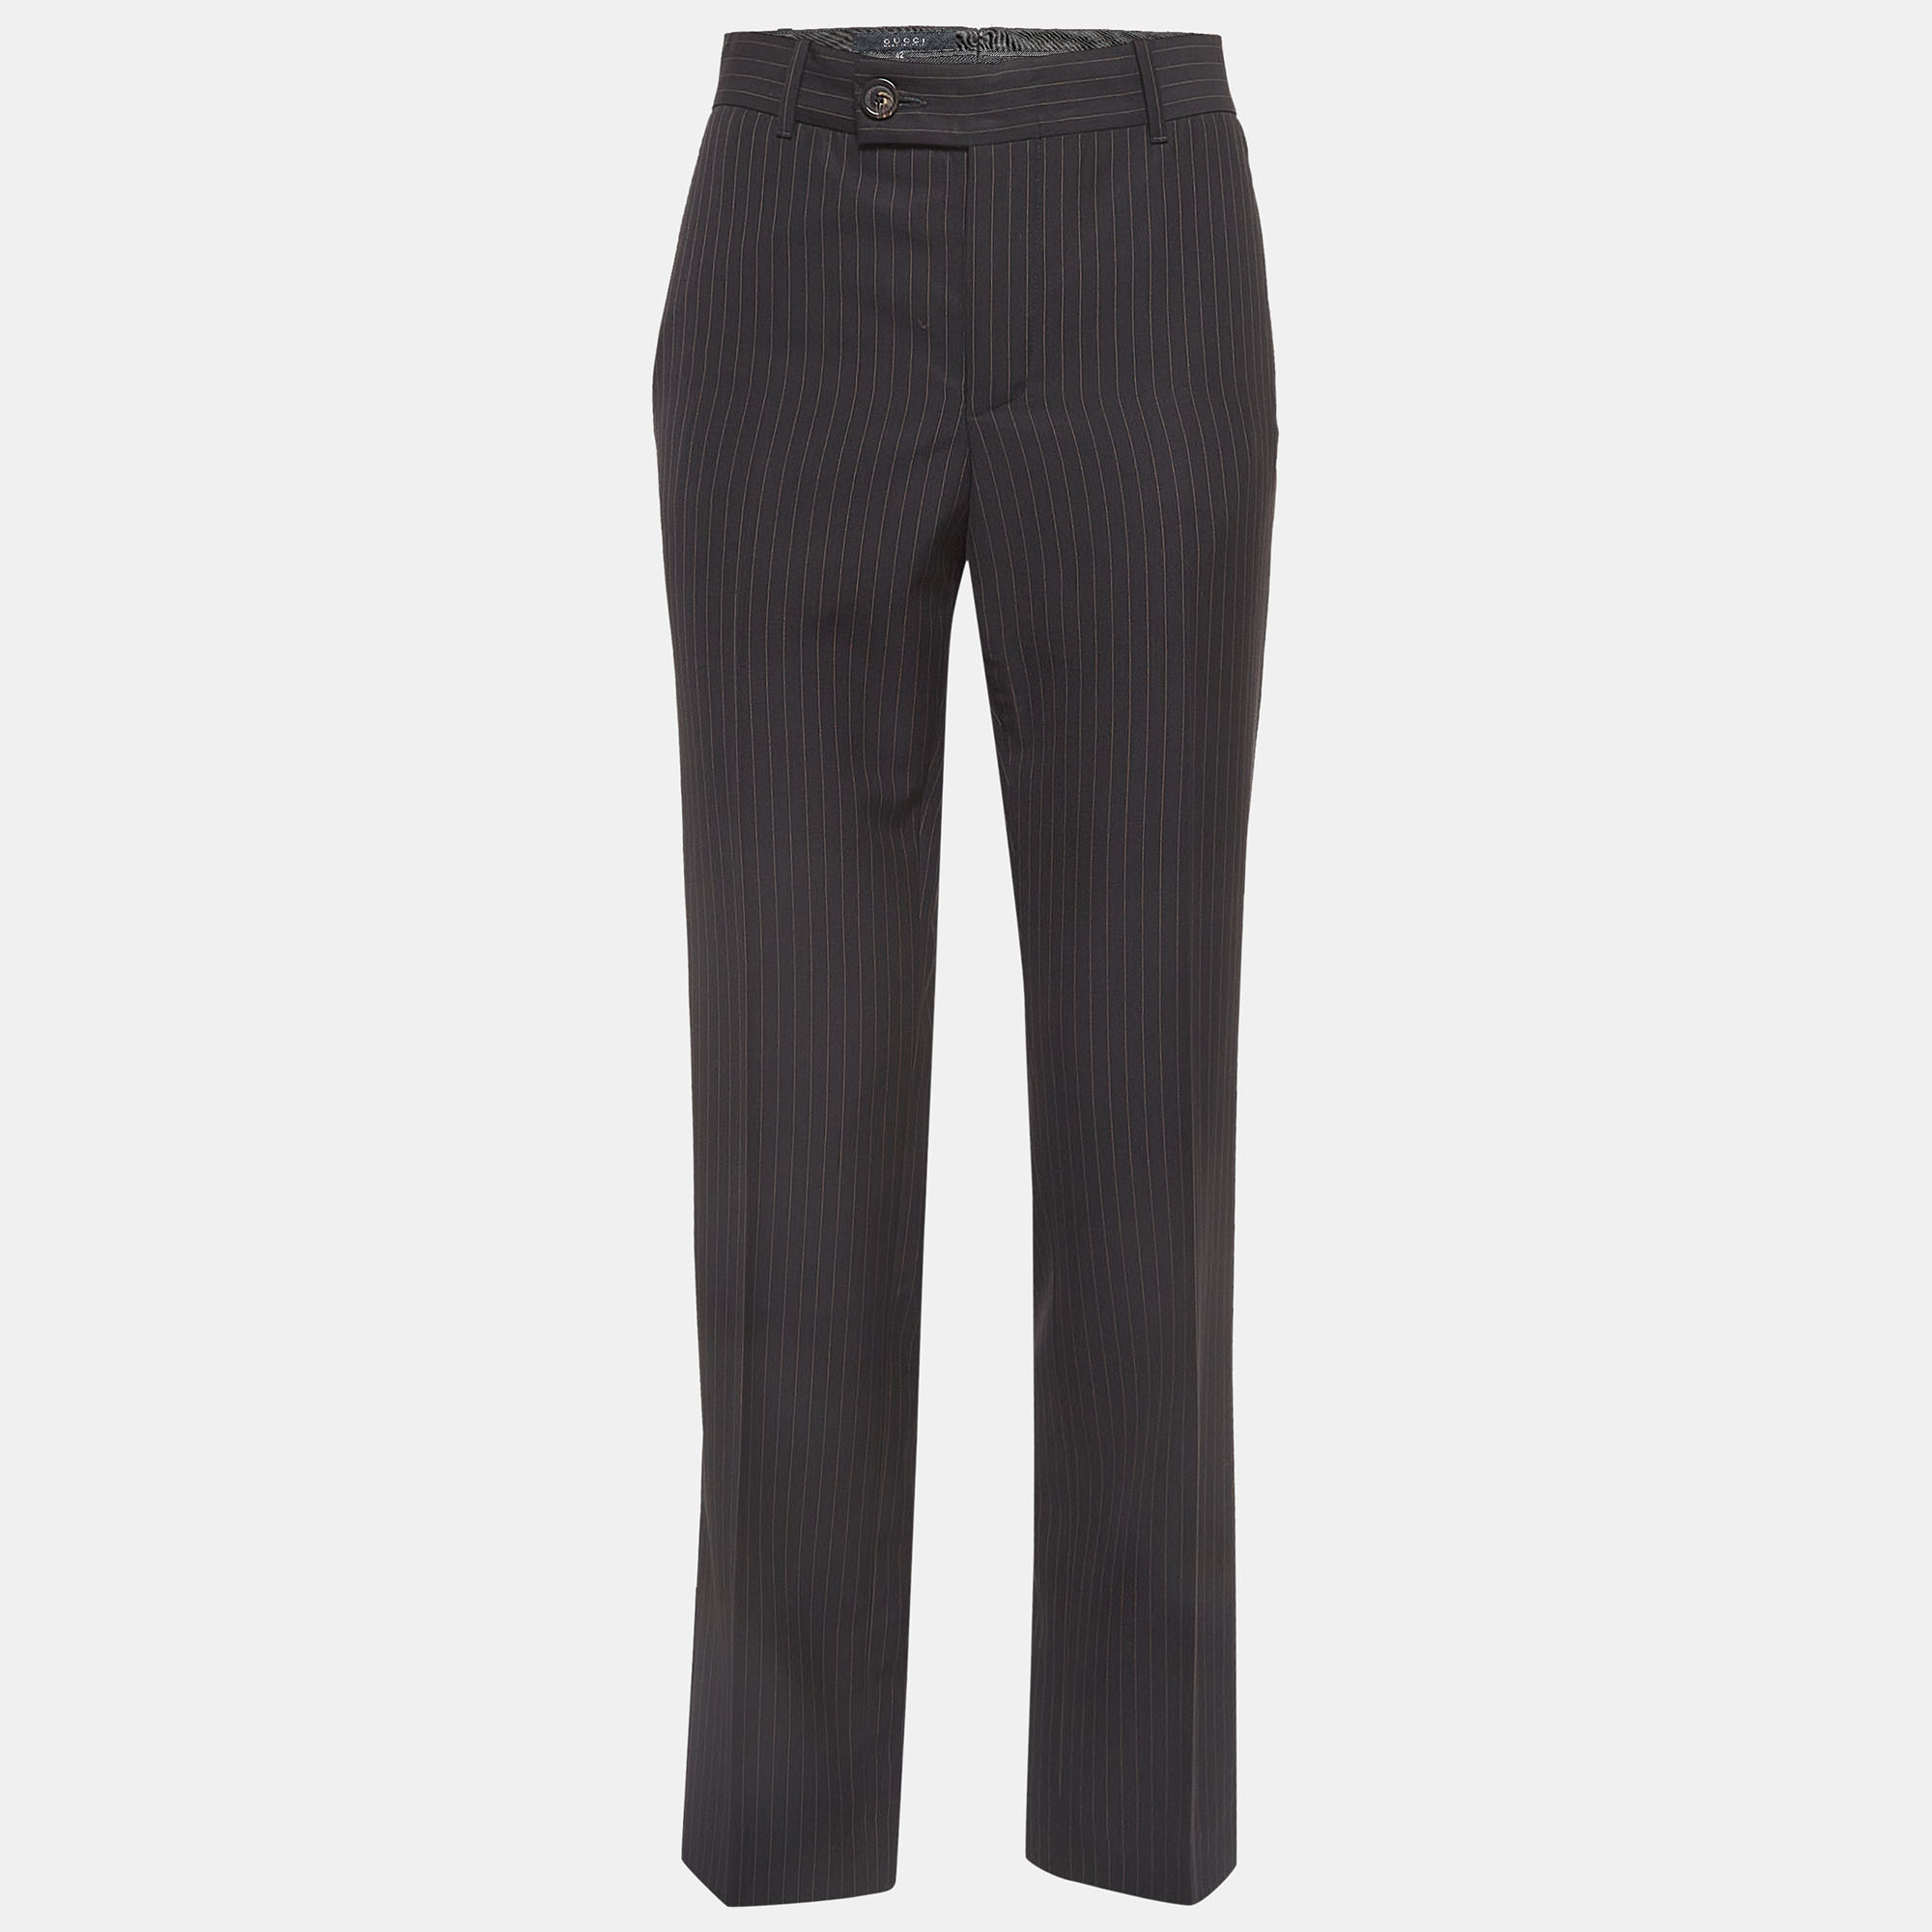 Pre-owned Gucci Black Pinstripe Wool Formal Trousers M